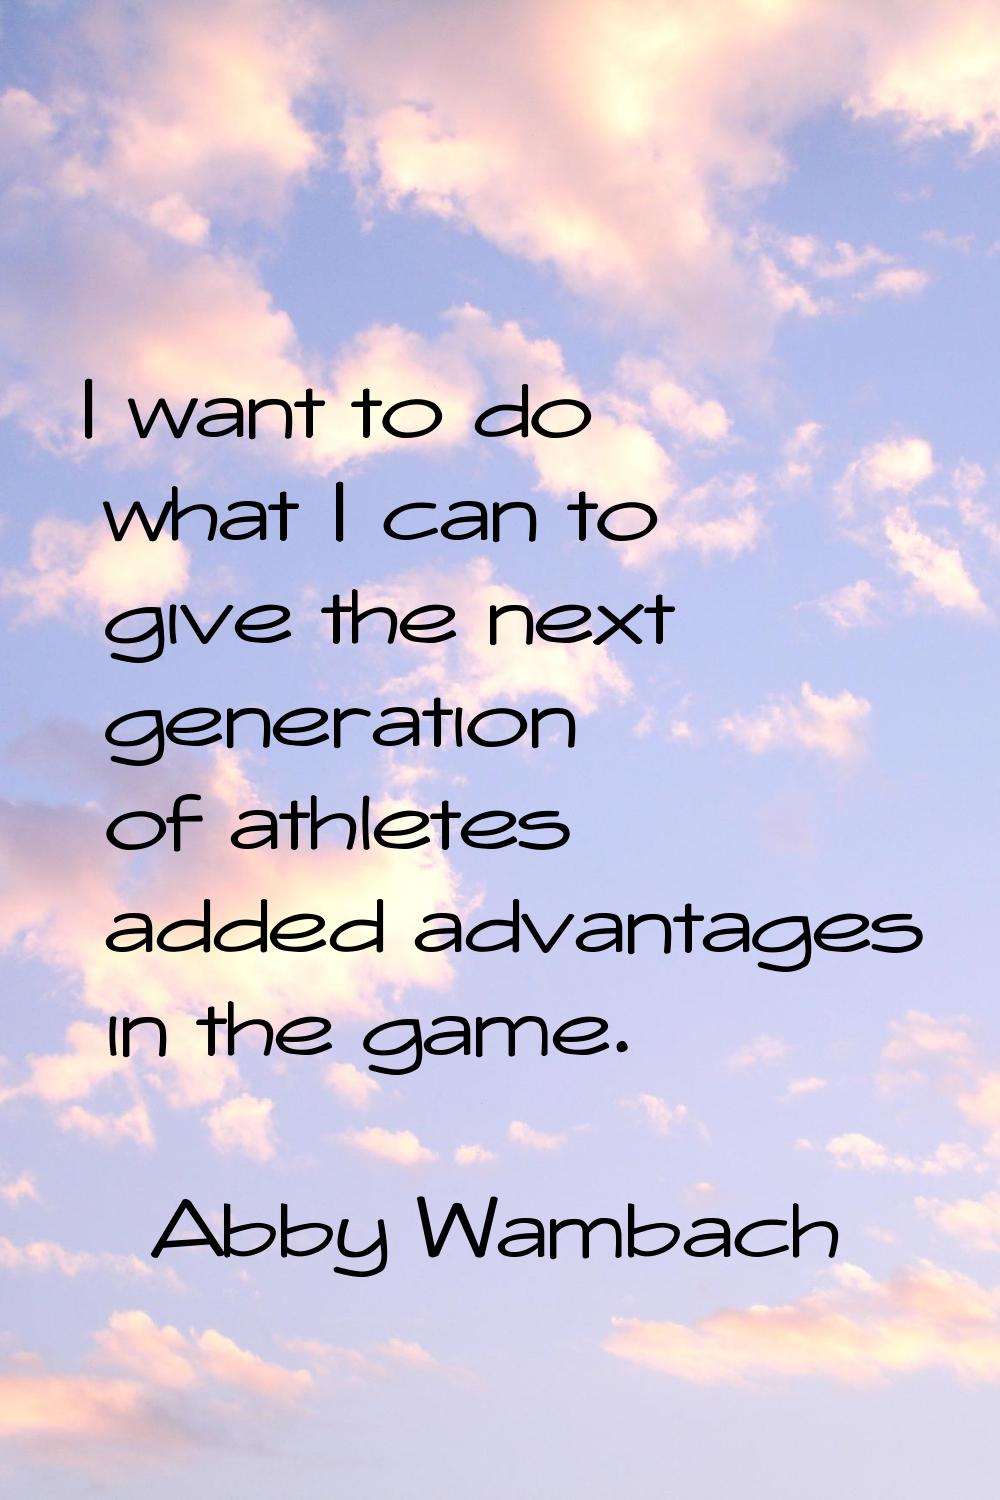 I want to do what I can to give the next generation of athletes added advantages in the game.